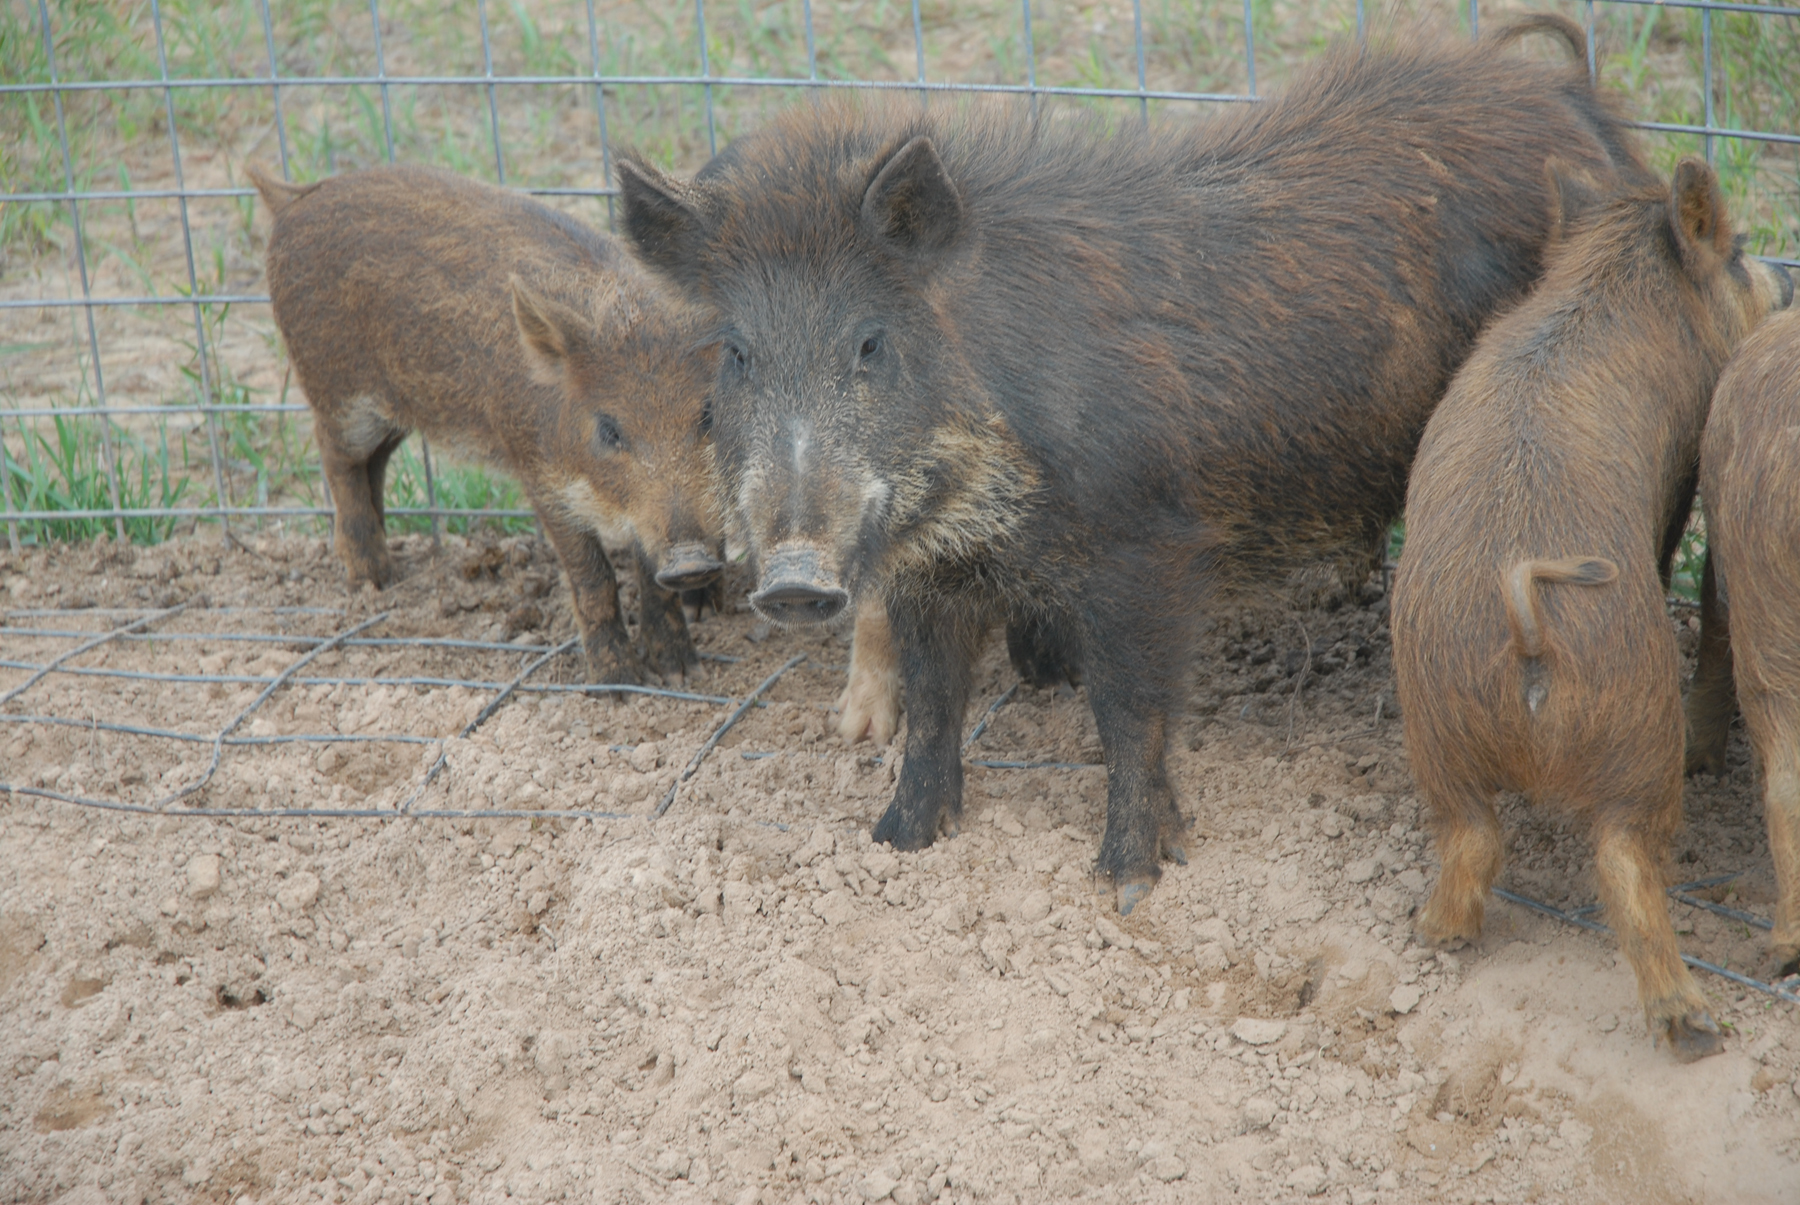 OCA's Michael Kelsey Hopes Oklahoma Department of Wildlife Conservation Will Develop Aggressive Rules to Help Wipe Out Wild Hogs After Governor Vetoes SB 1142 